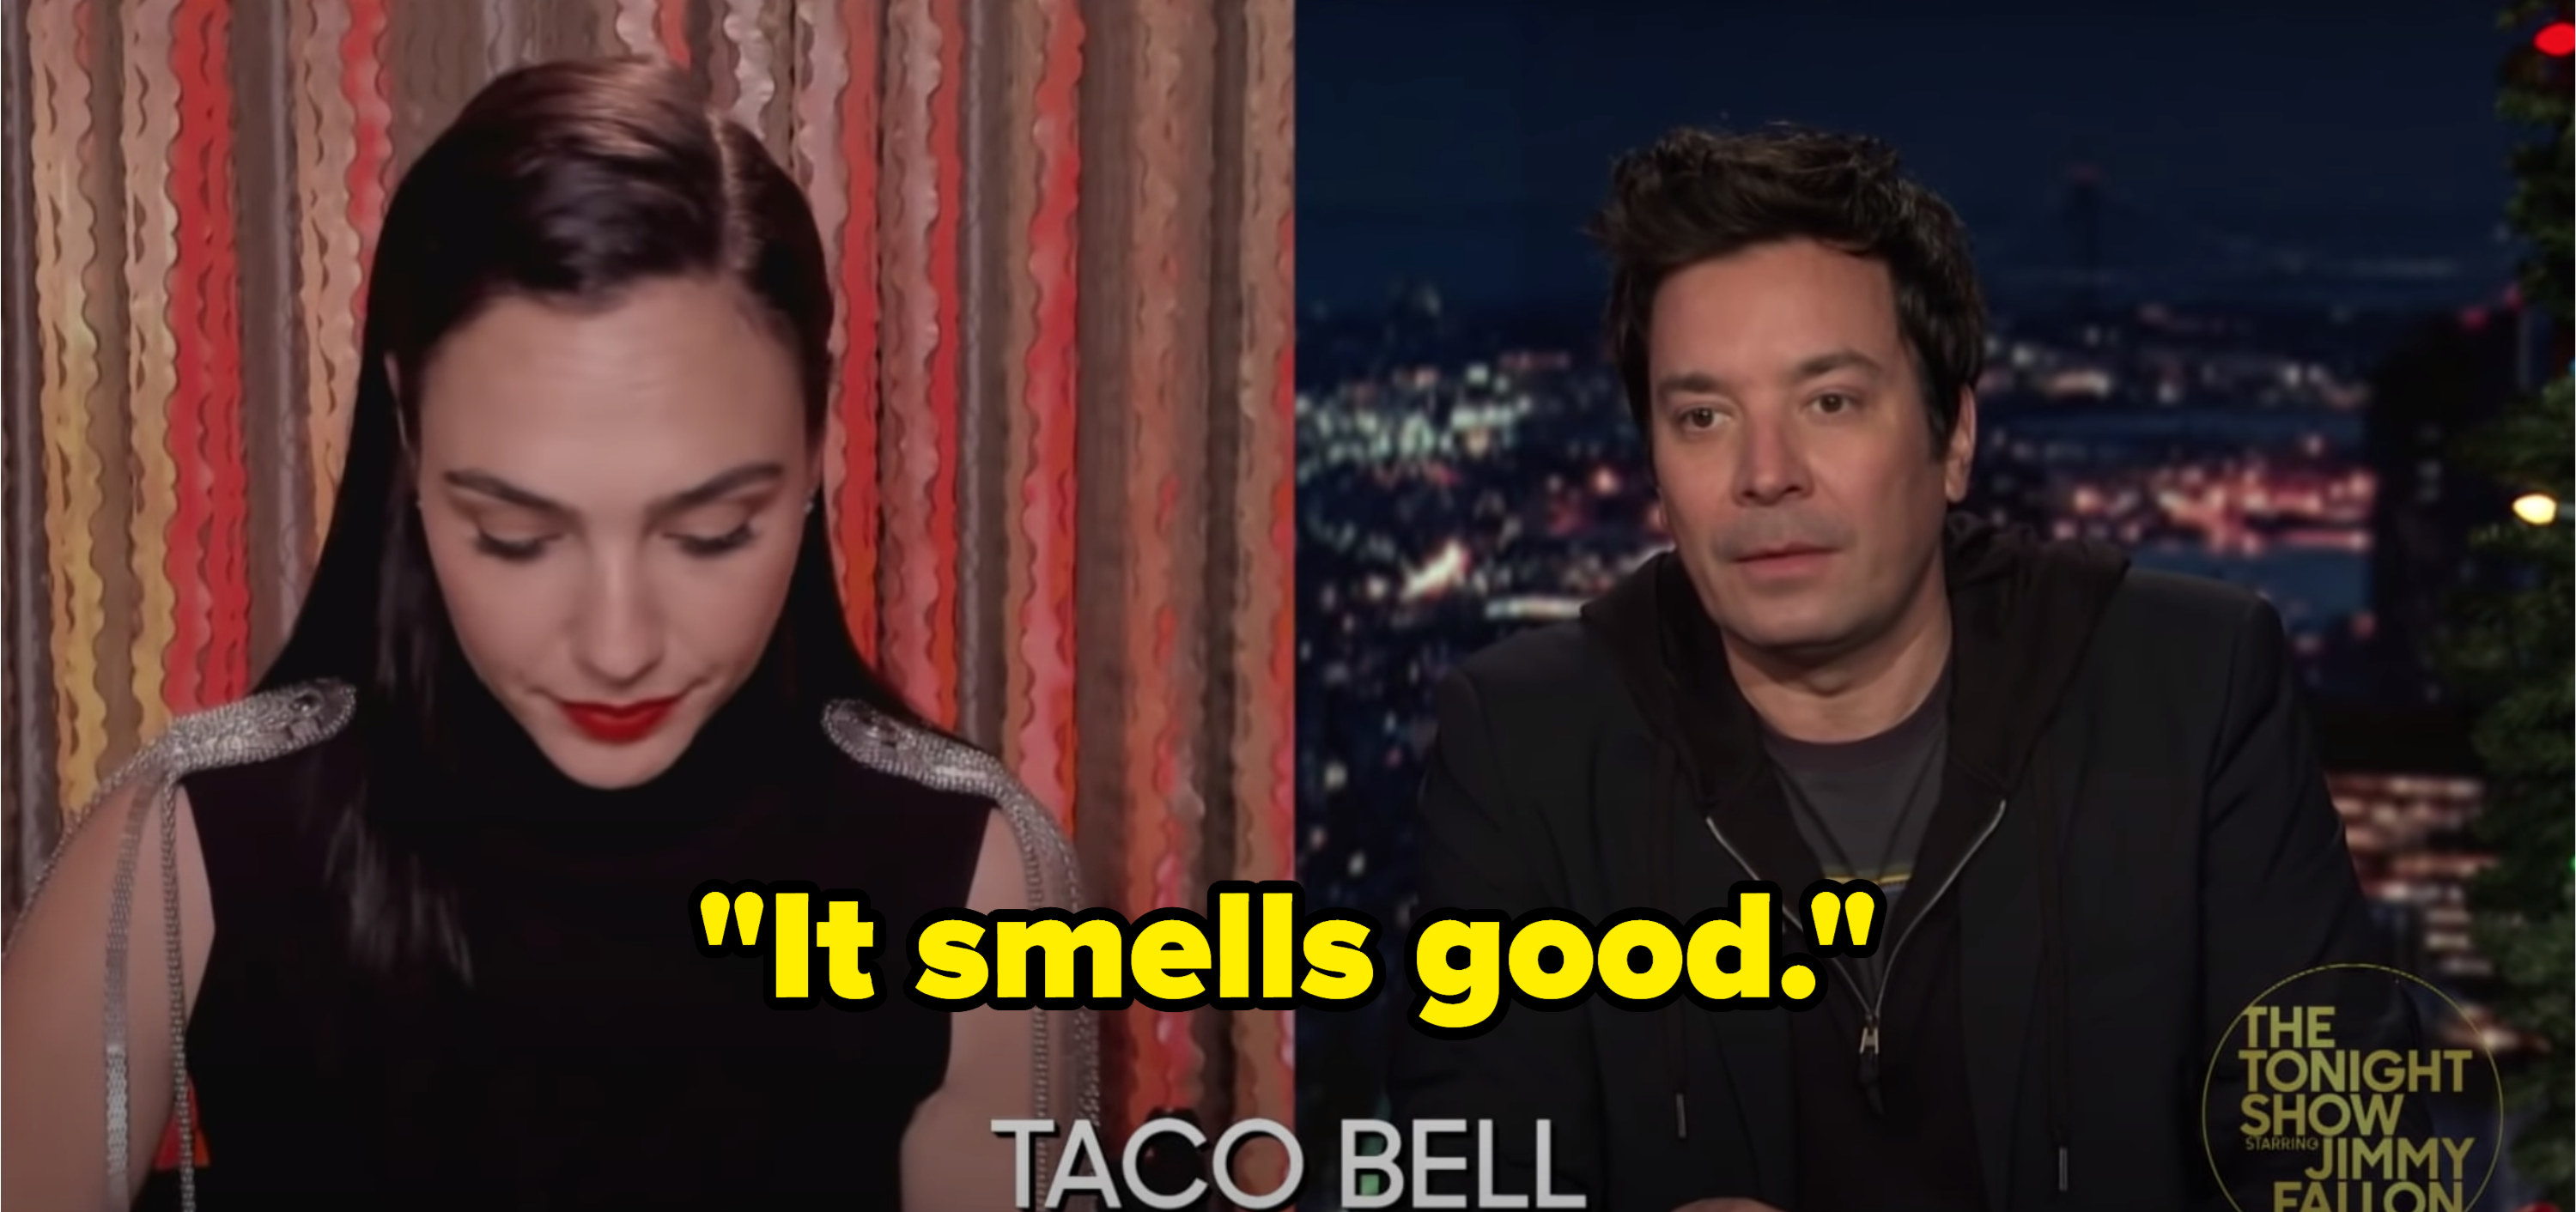 Gal Gadot next to Jimmy Fallon as she unwraps the taco and comments &quot;It smells good&quot;